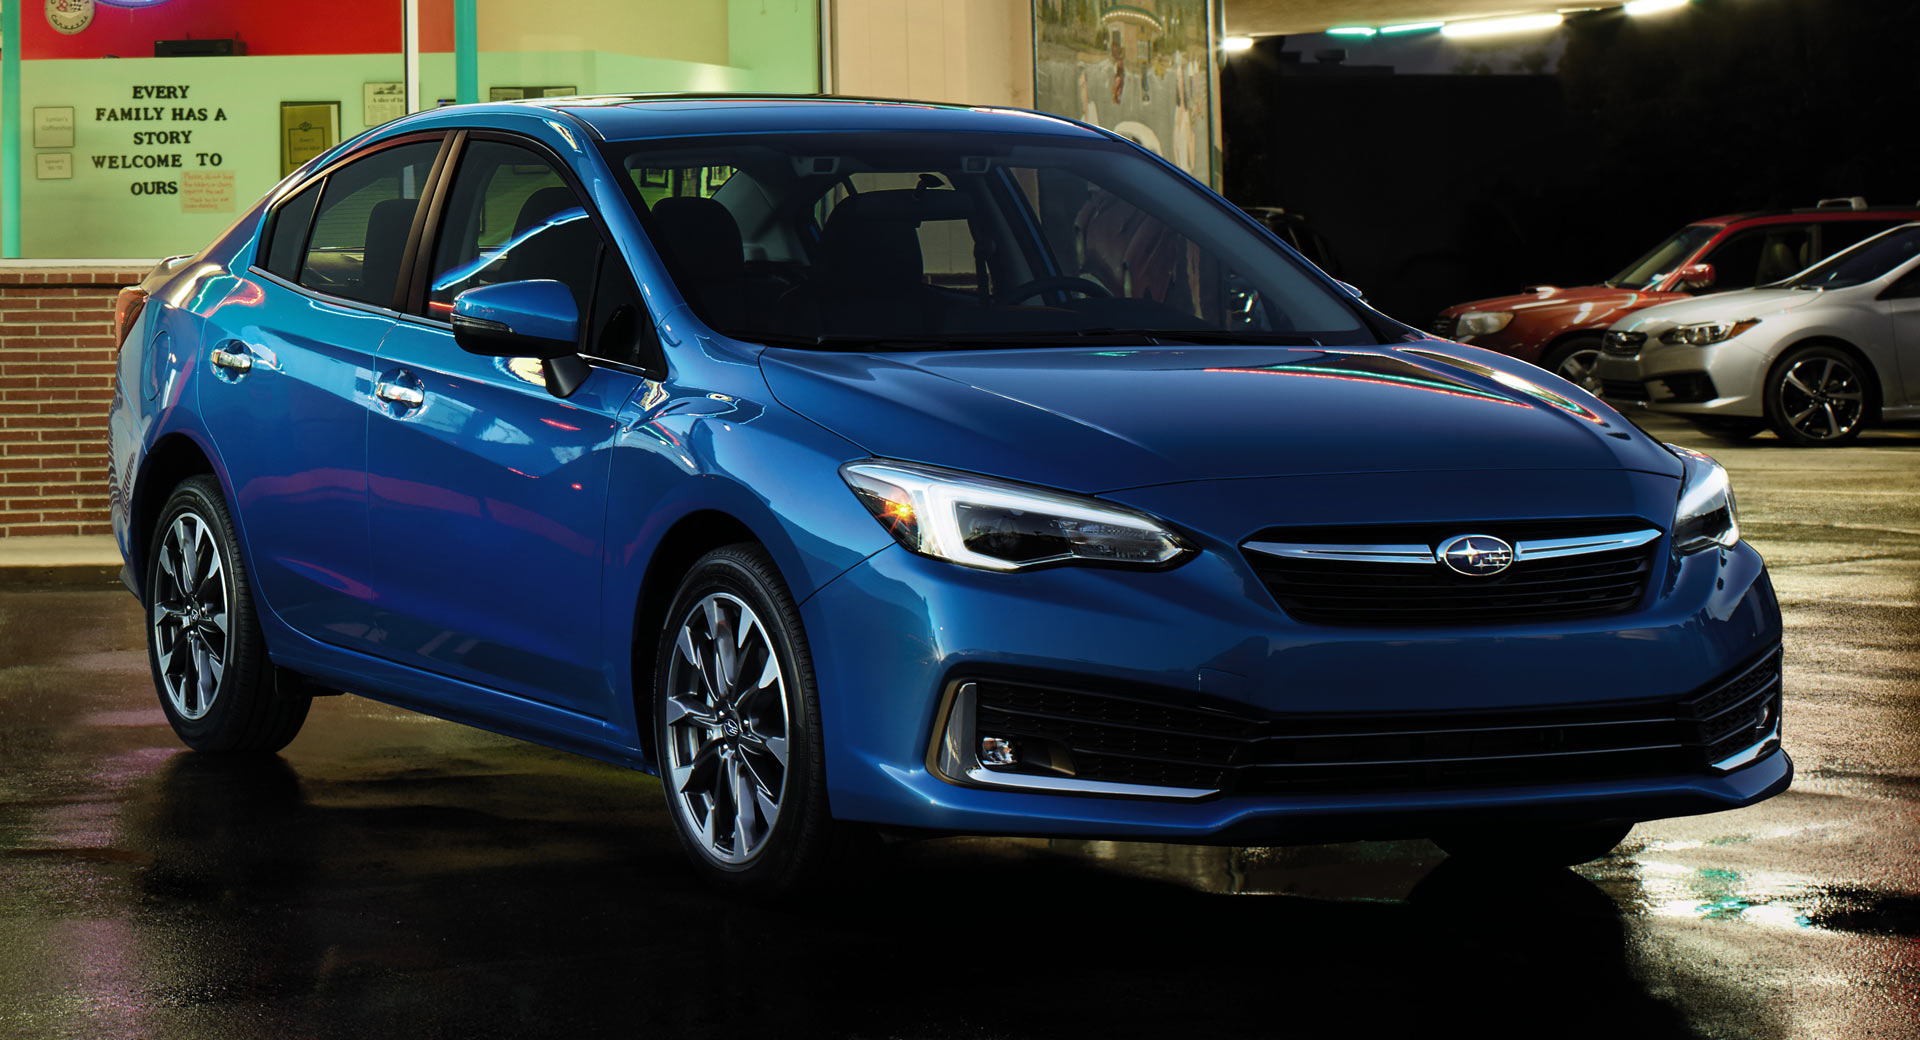 2020 Subaru Impreza Unveiled With Updated Looks And New